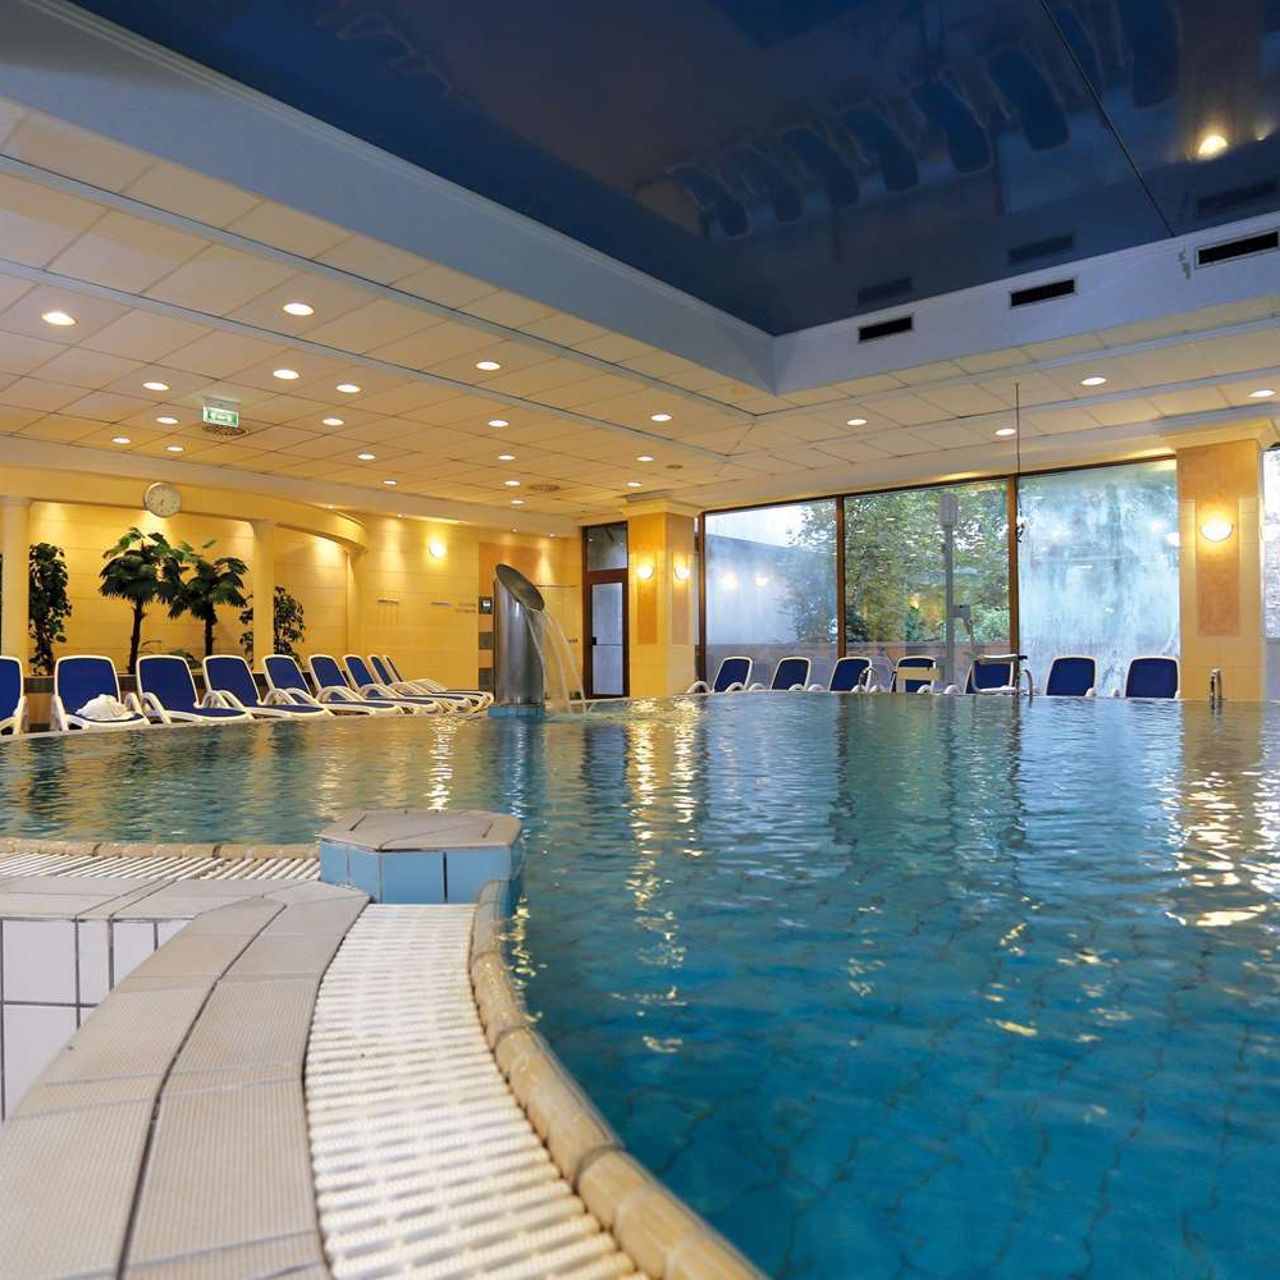 Hotel Ensana Thermal Margaret Island - Budapest - Great prices at HOTEL INFO